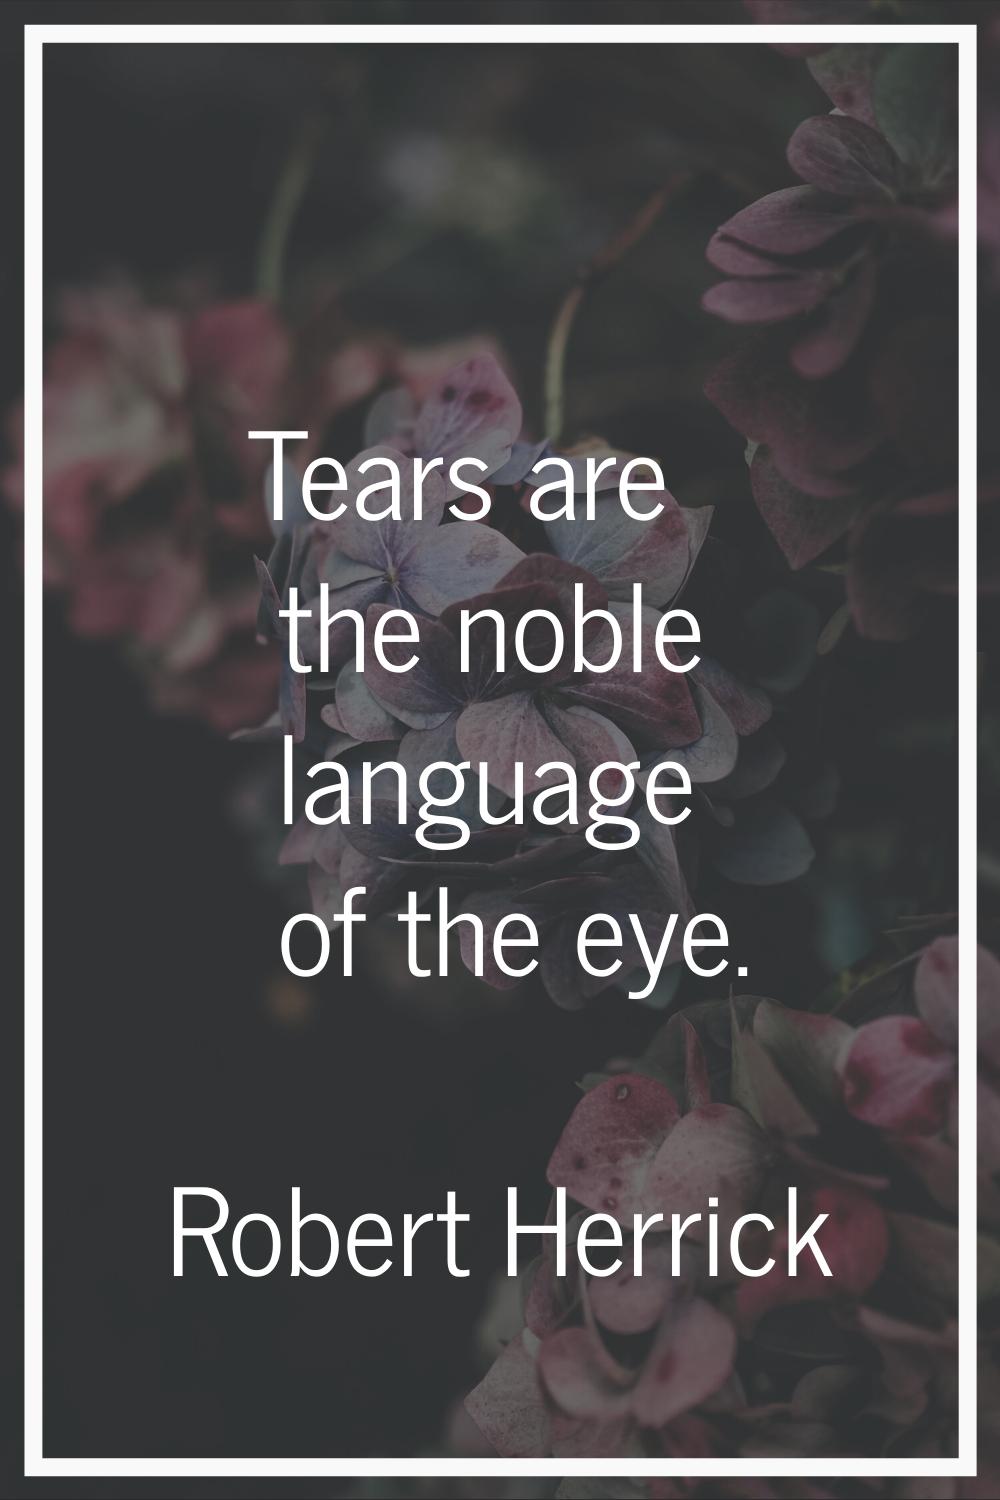 Tears are the noble language of the eye.